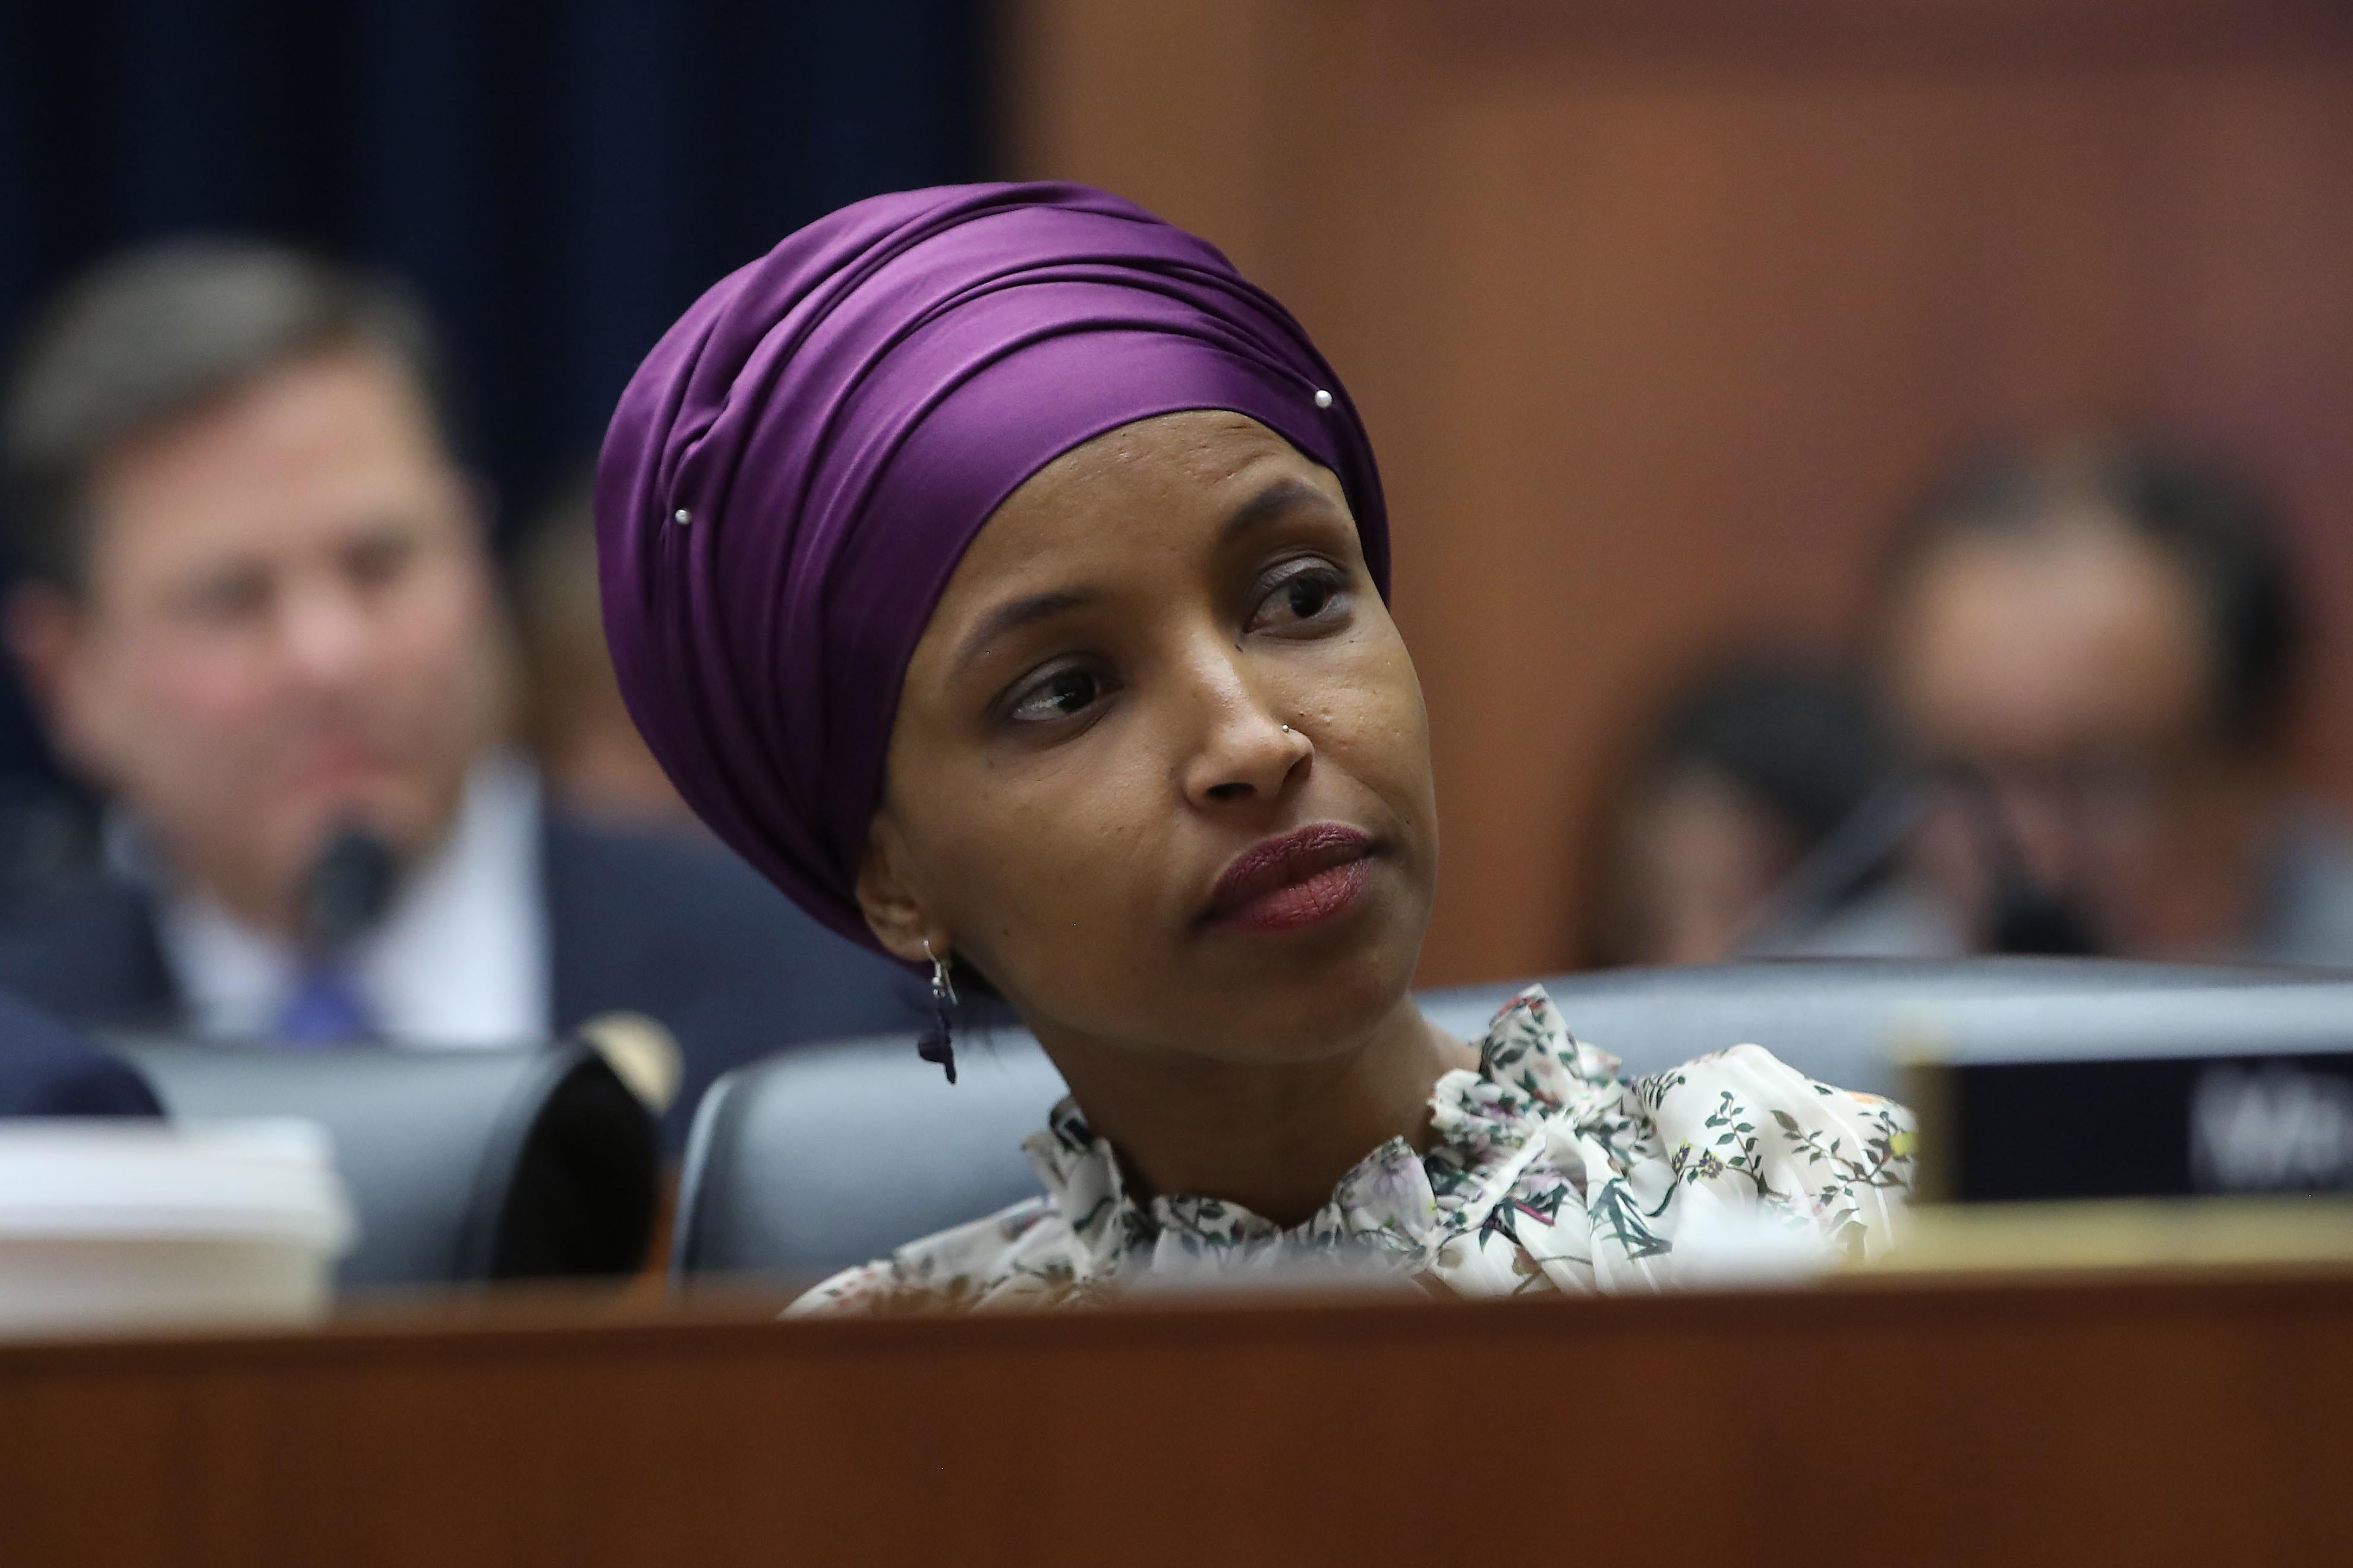 Rep. Ilhan Omar (D-MN) participates in a House Education and Labor Committee Markup on the H.R. 582 Raise The Wage Act, in the Rayburn House Office Building on March 6, 2019 in Washington, D.C.